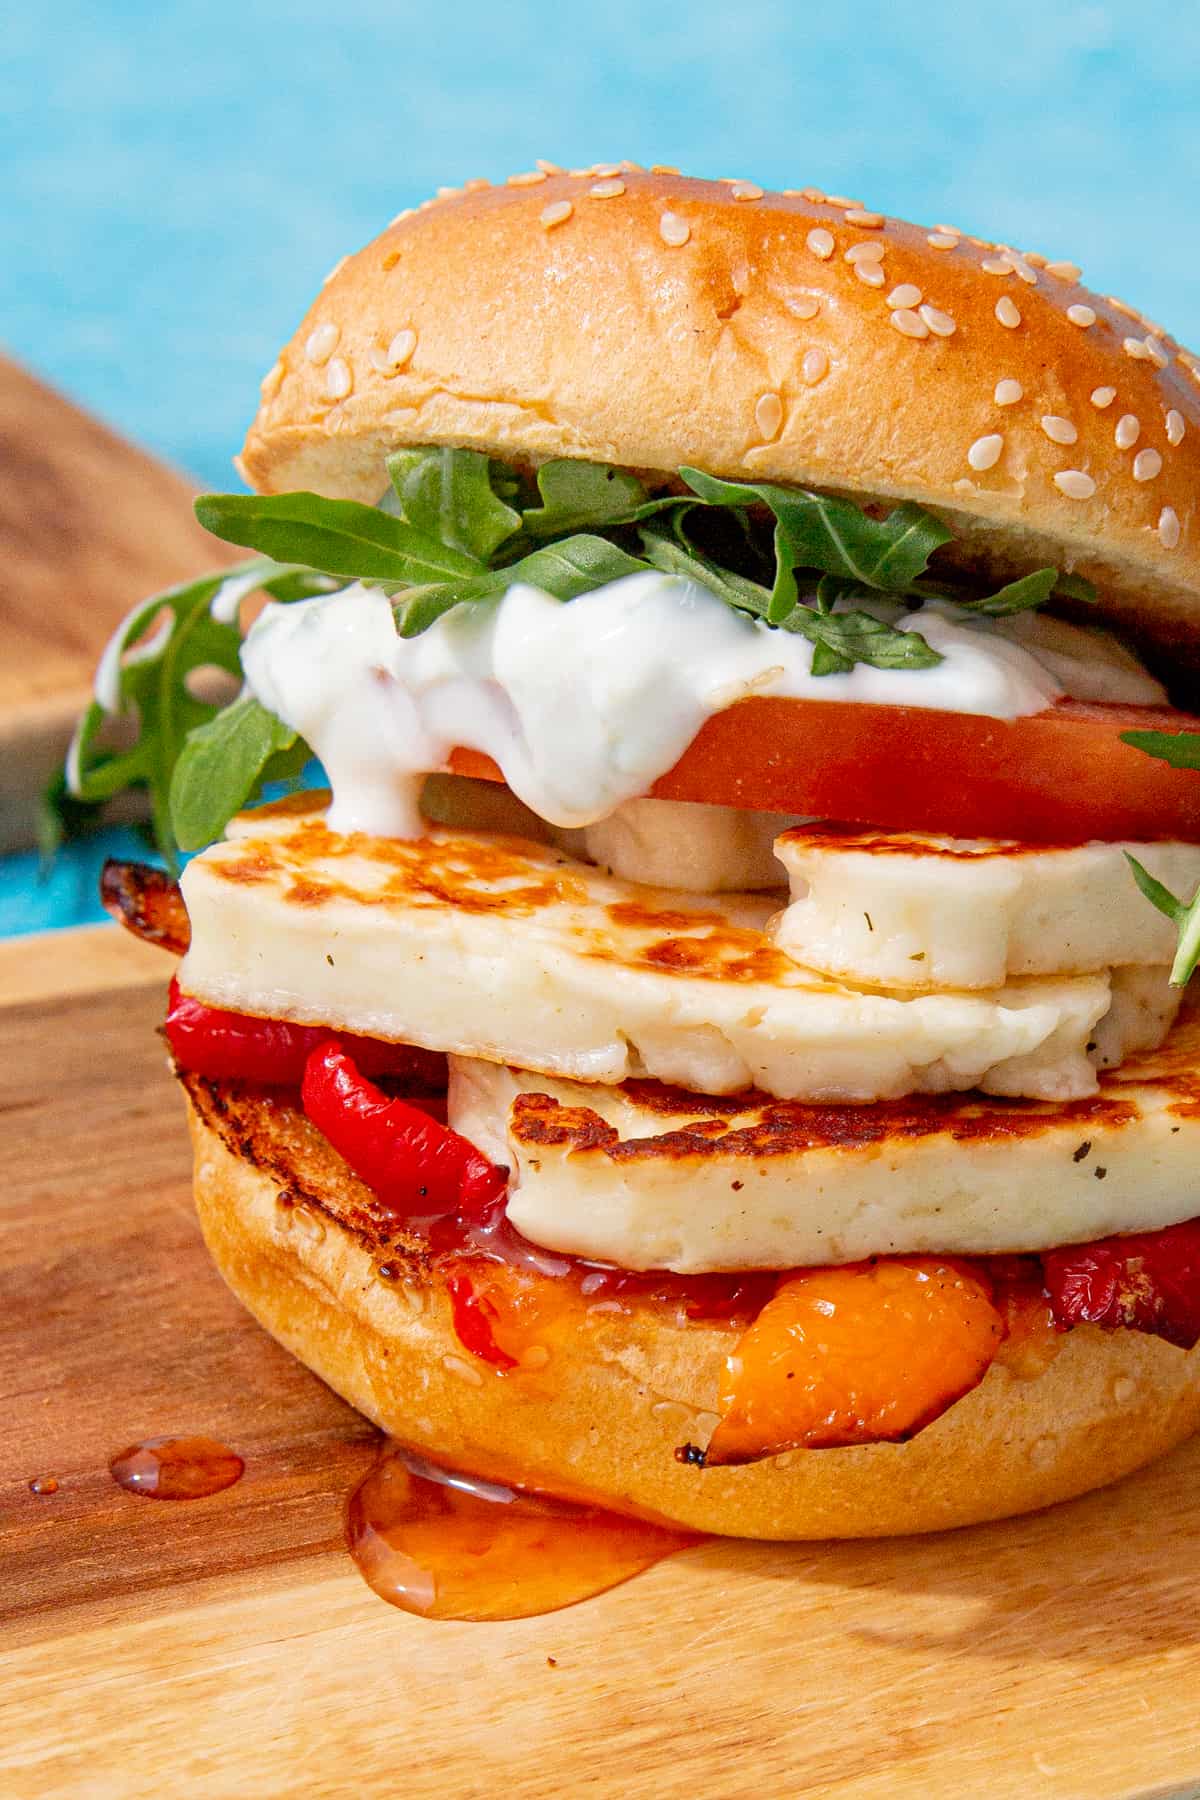 A burger with golden browned halloumi slices, peppers, tomatoes rocket, sweet chilli sauce and tzatziki in a sesame bun.